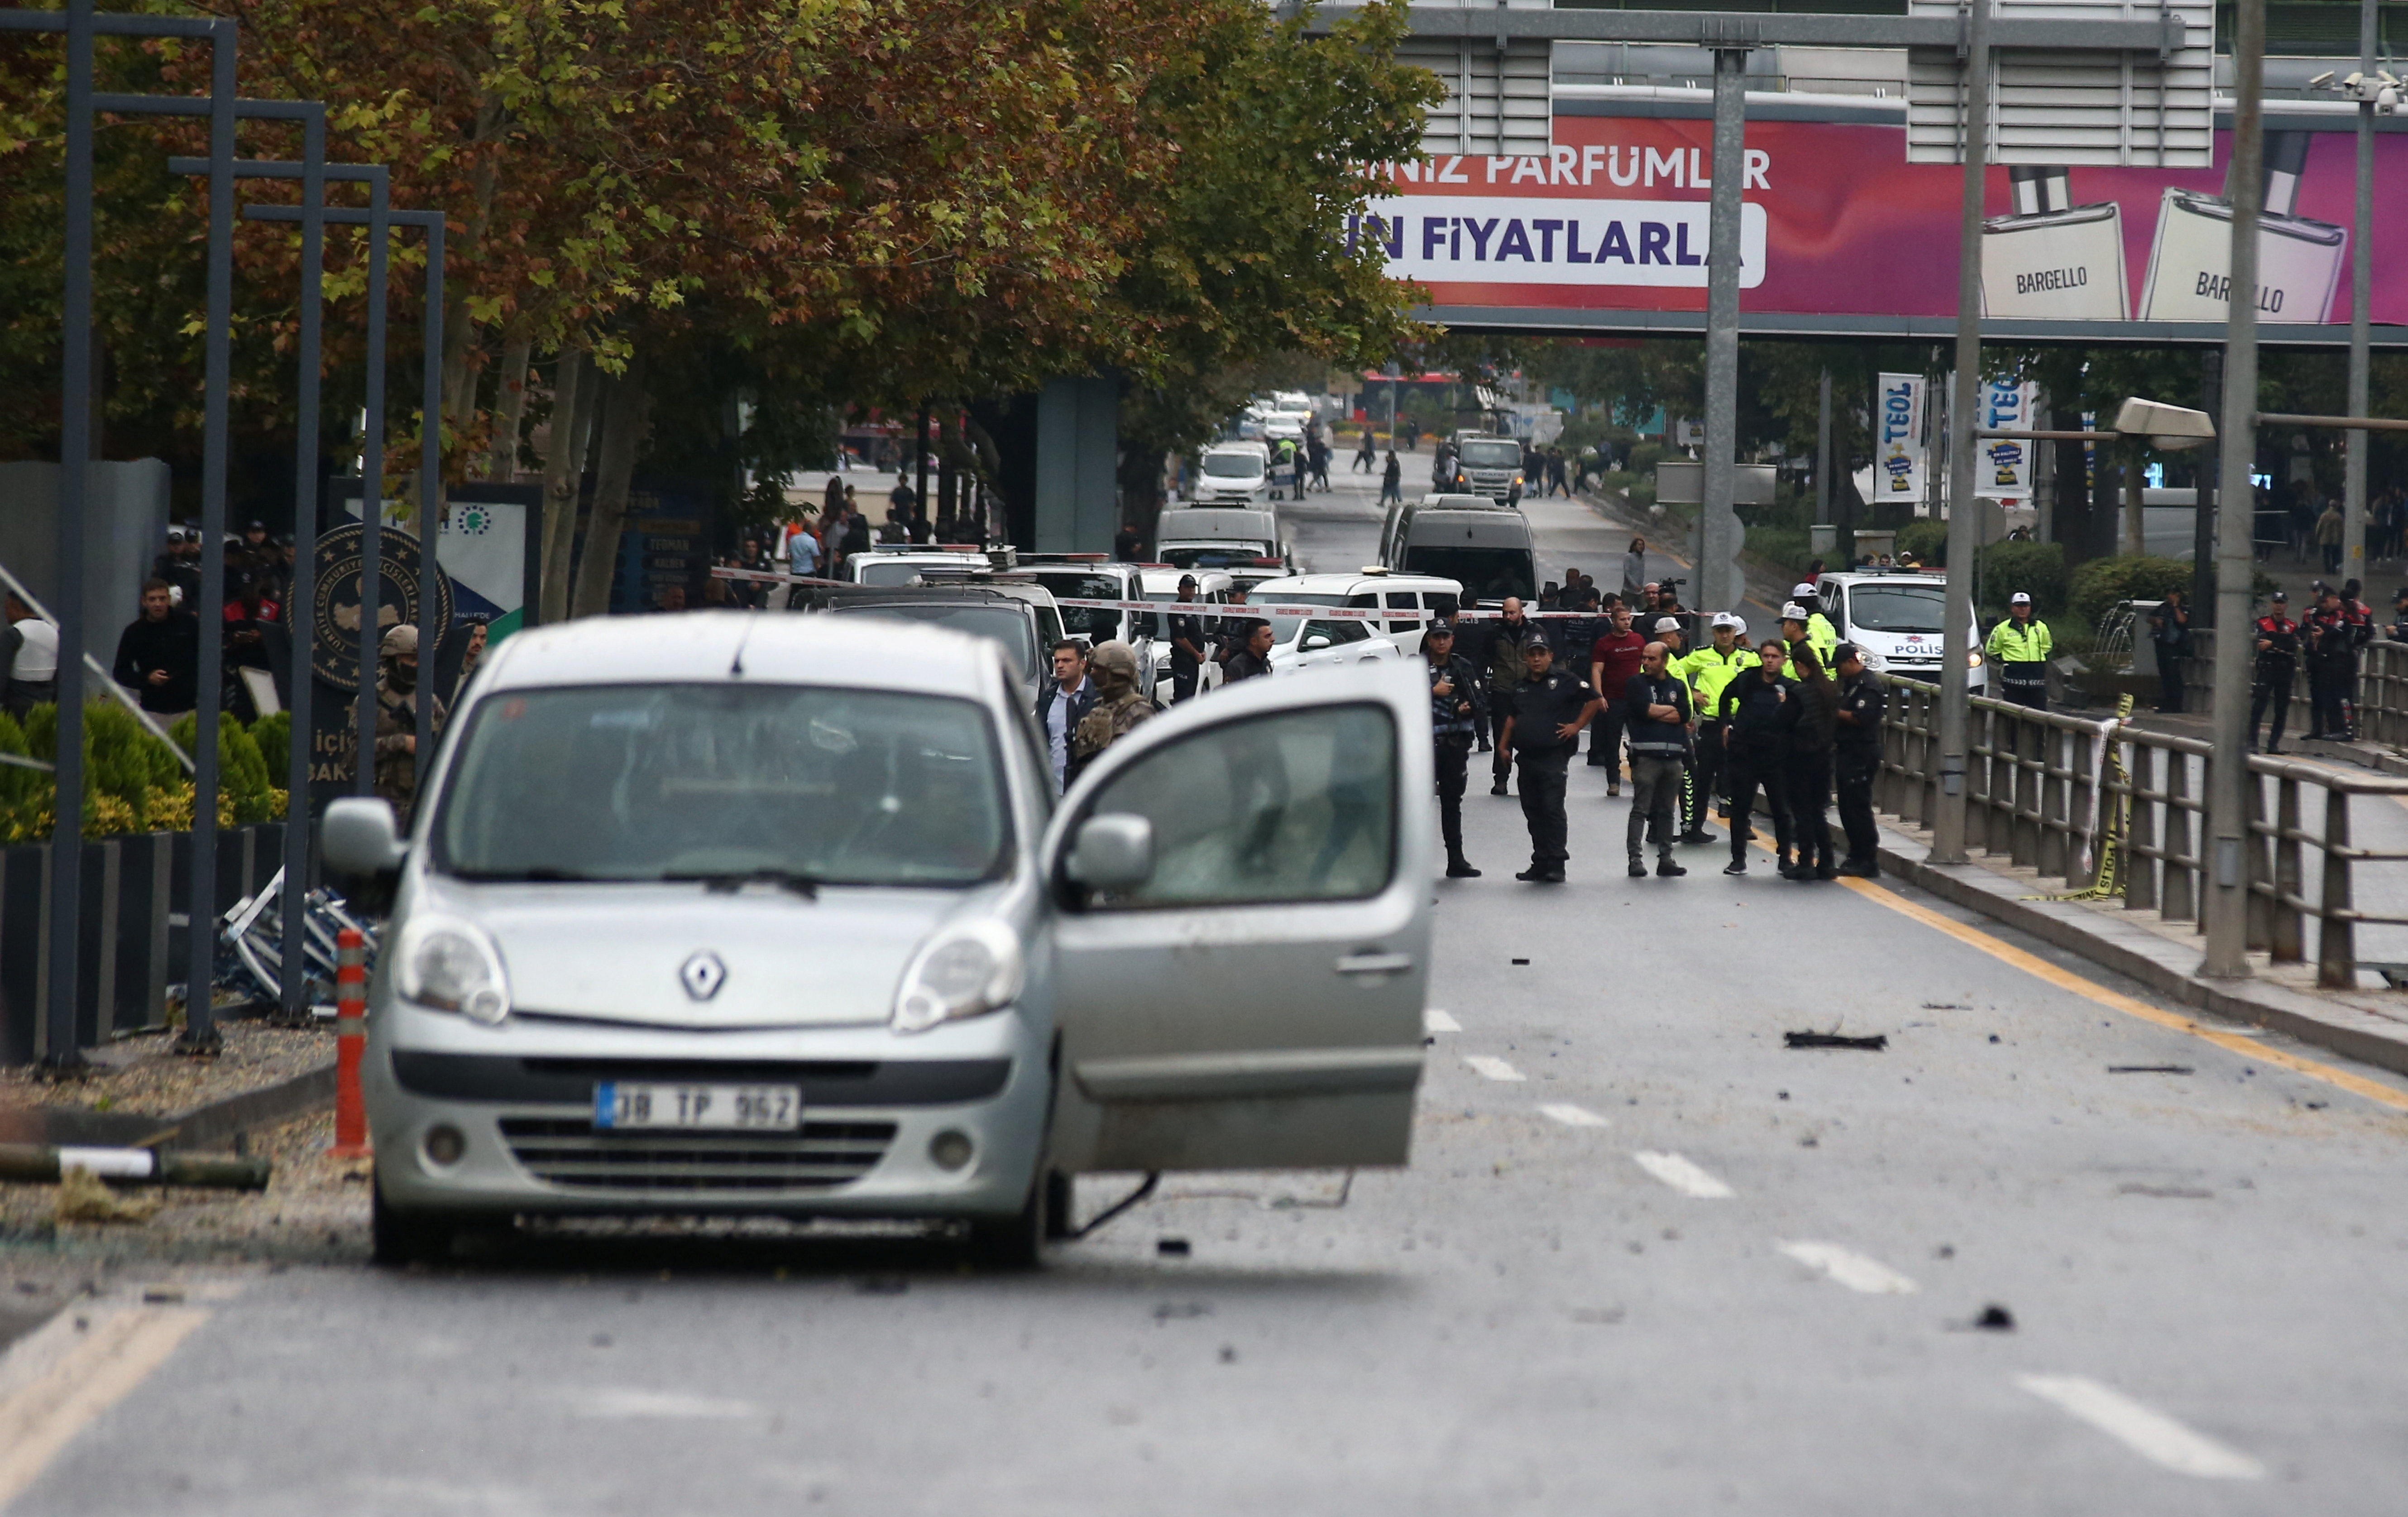 Attackers set off bomb at Turkish government building, both die | Reuters